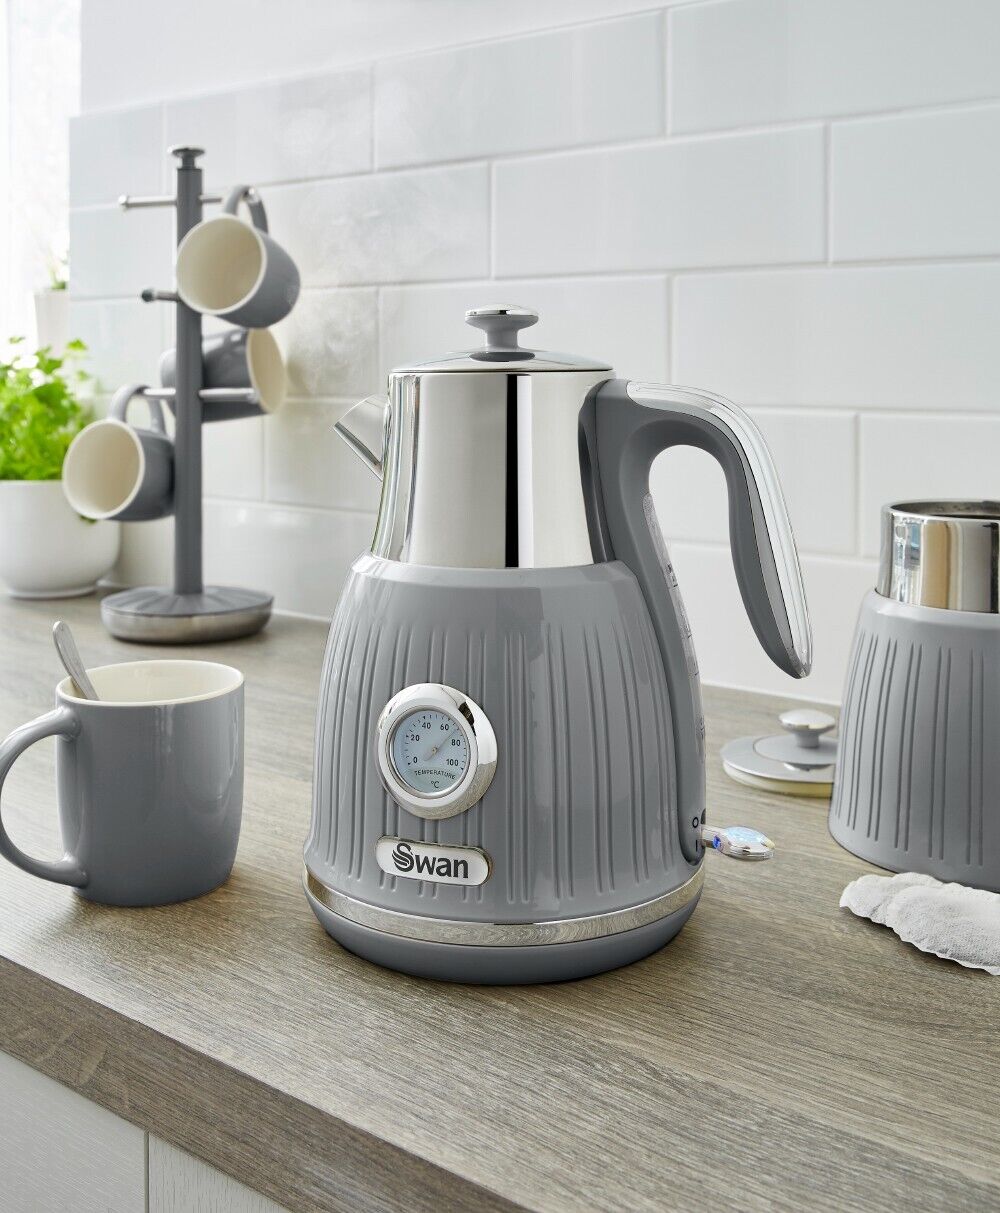 SWAN Retro Grey 1.5L 3KW Dial Kettle, 4 Slice Toaster, Breadbin & Canisters Matching Set of 6